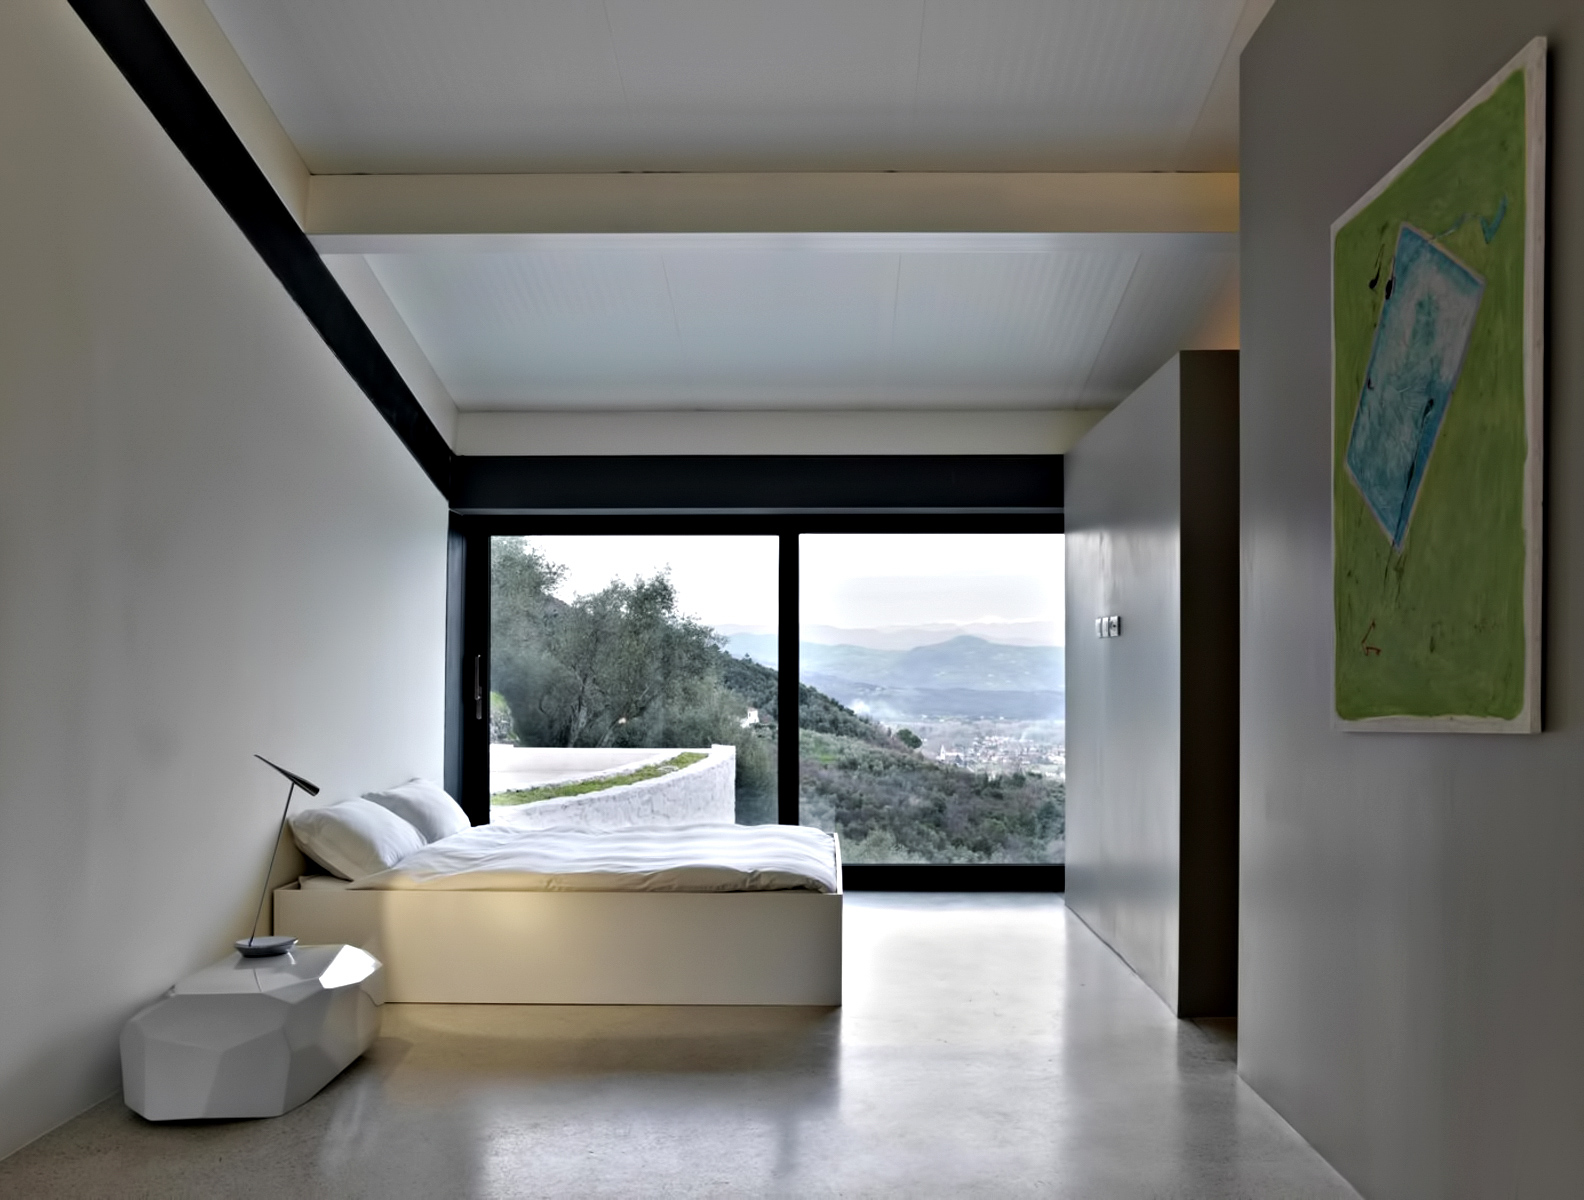 Casa Boucquillon Luxury Residence – Lucca, Tuscany, Italy